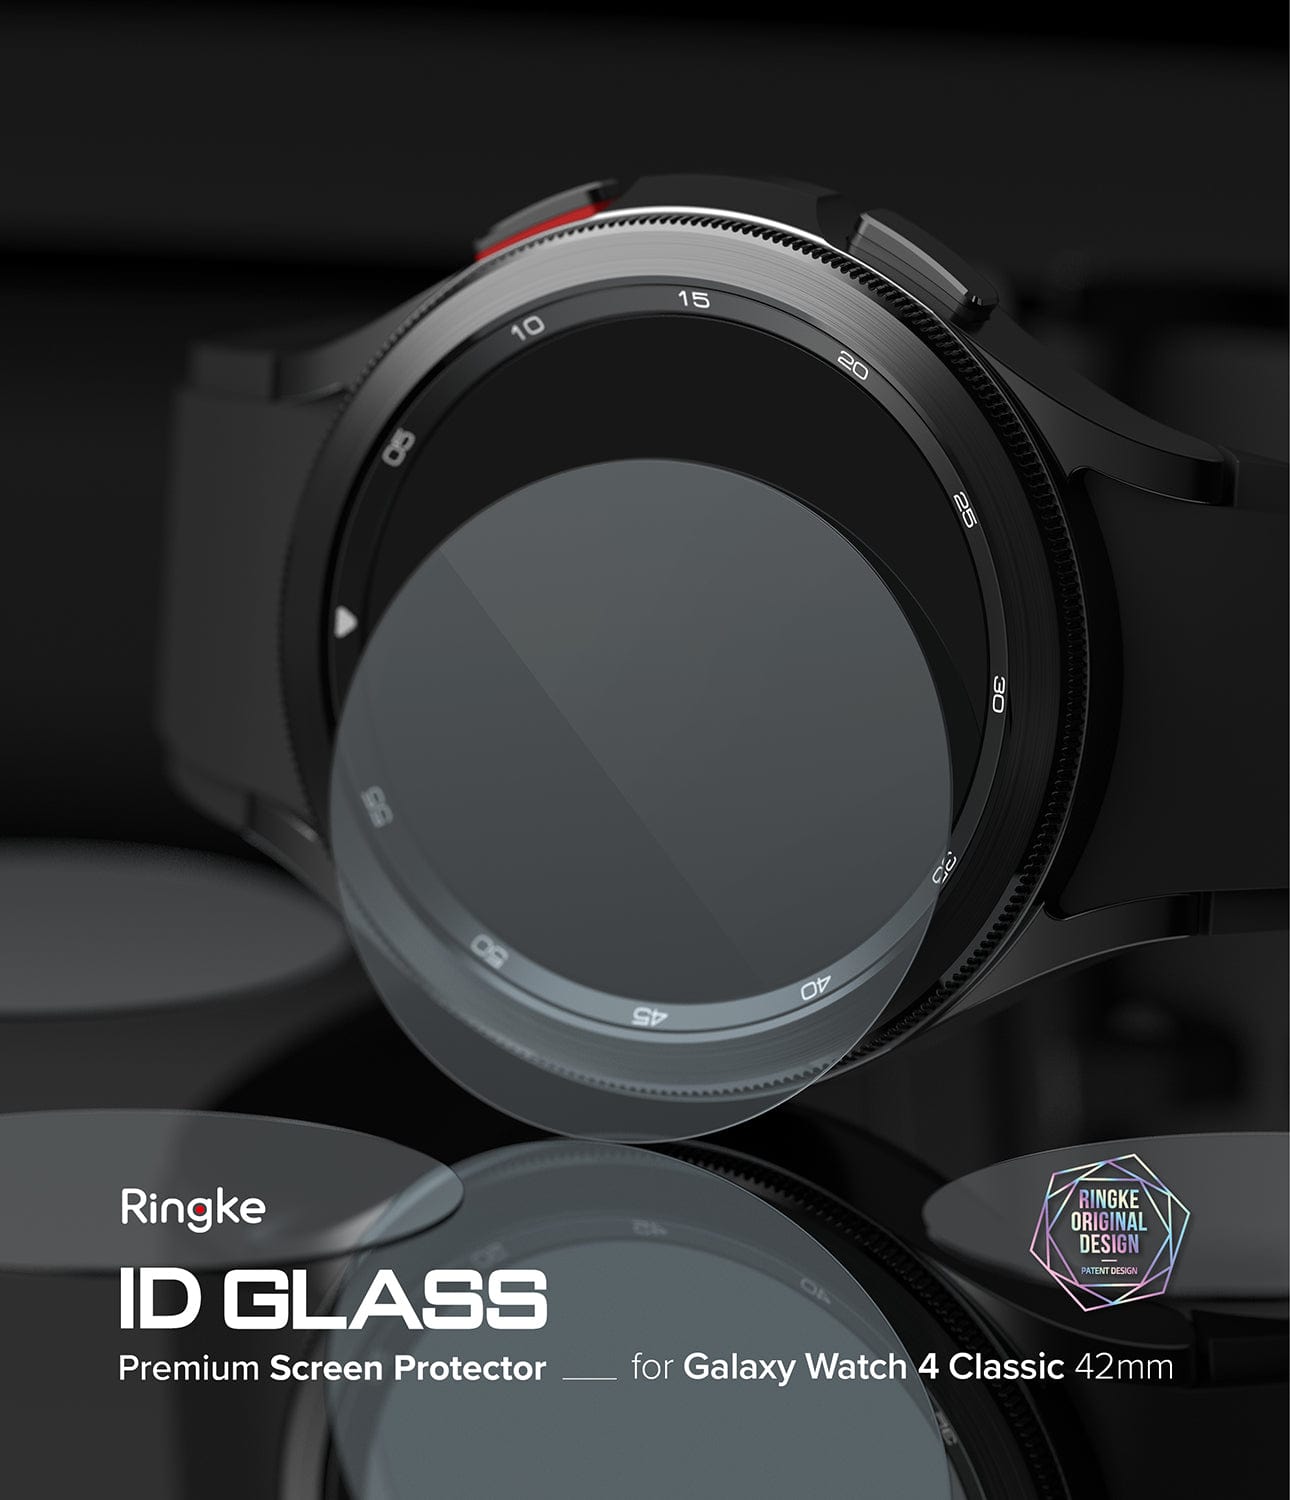 Shield your Galaxy Watch 4 Classic 42 with Ringke's ID Glass screen protector. Designed for durability and clarity